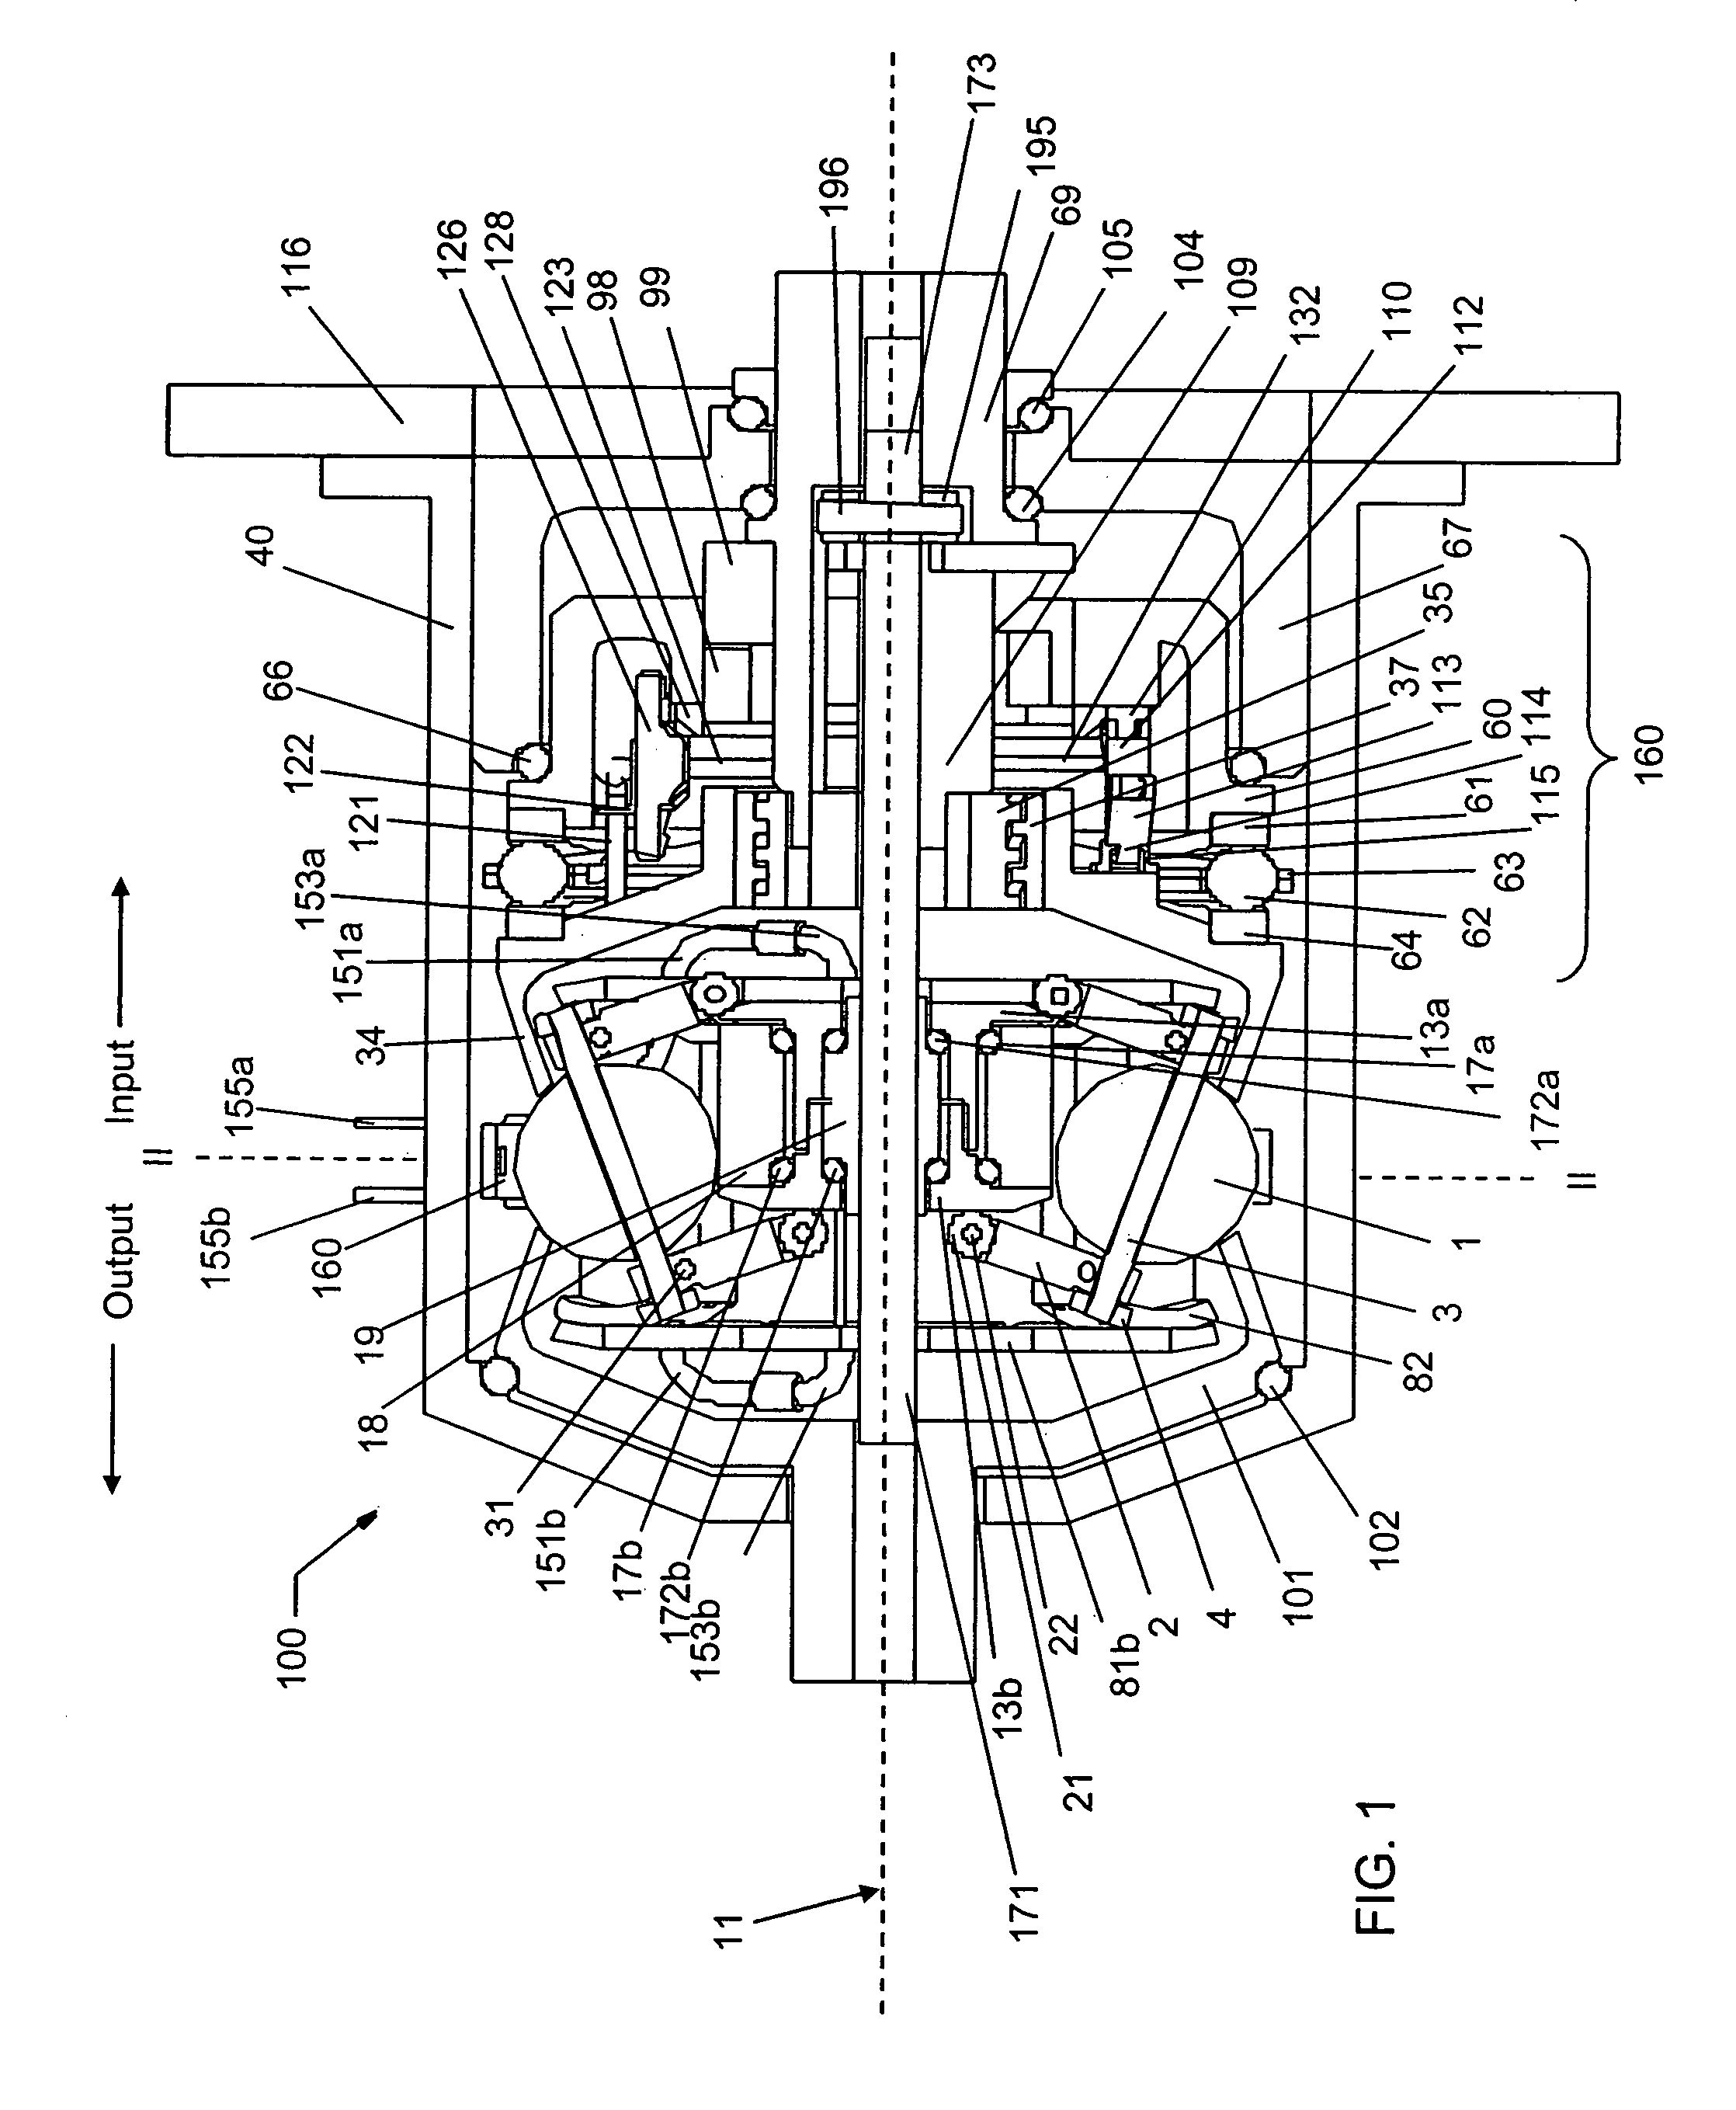 Continuously variable planetary gear set